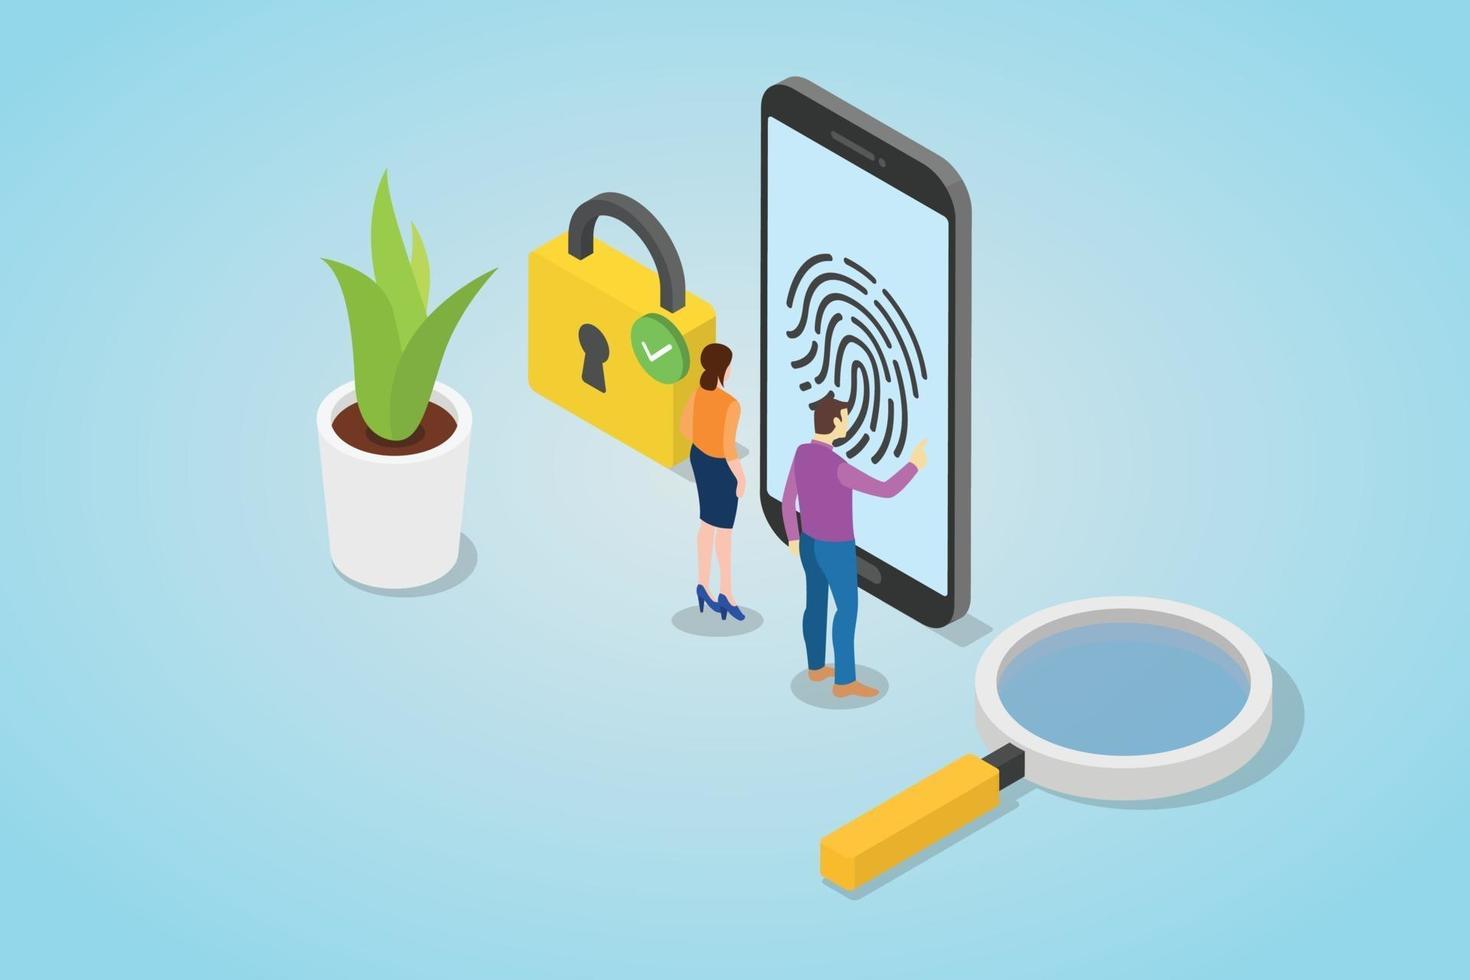 fingerprint security technology concept with smartphone vector